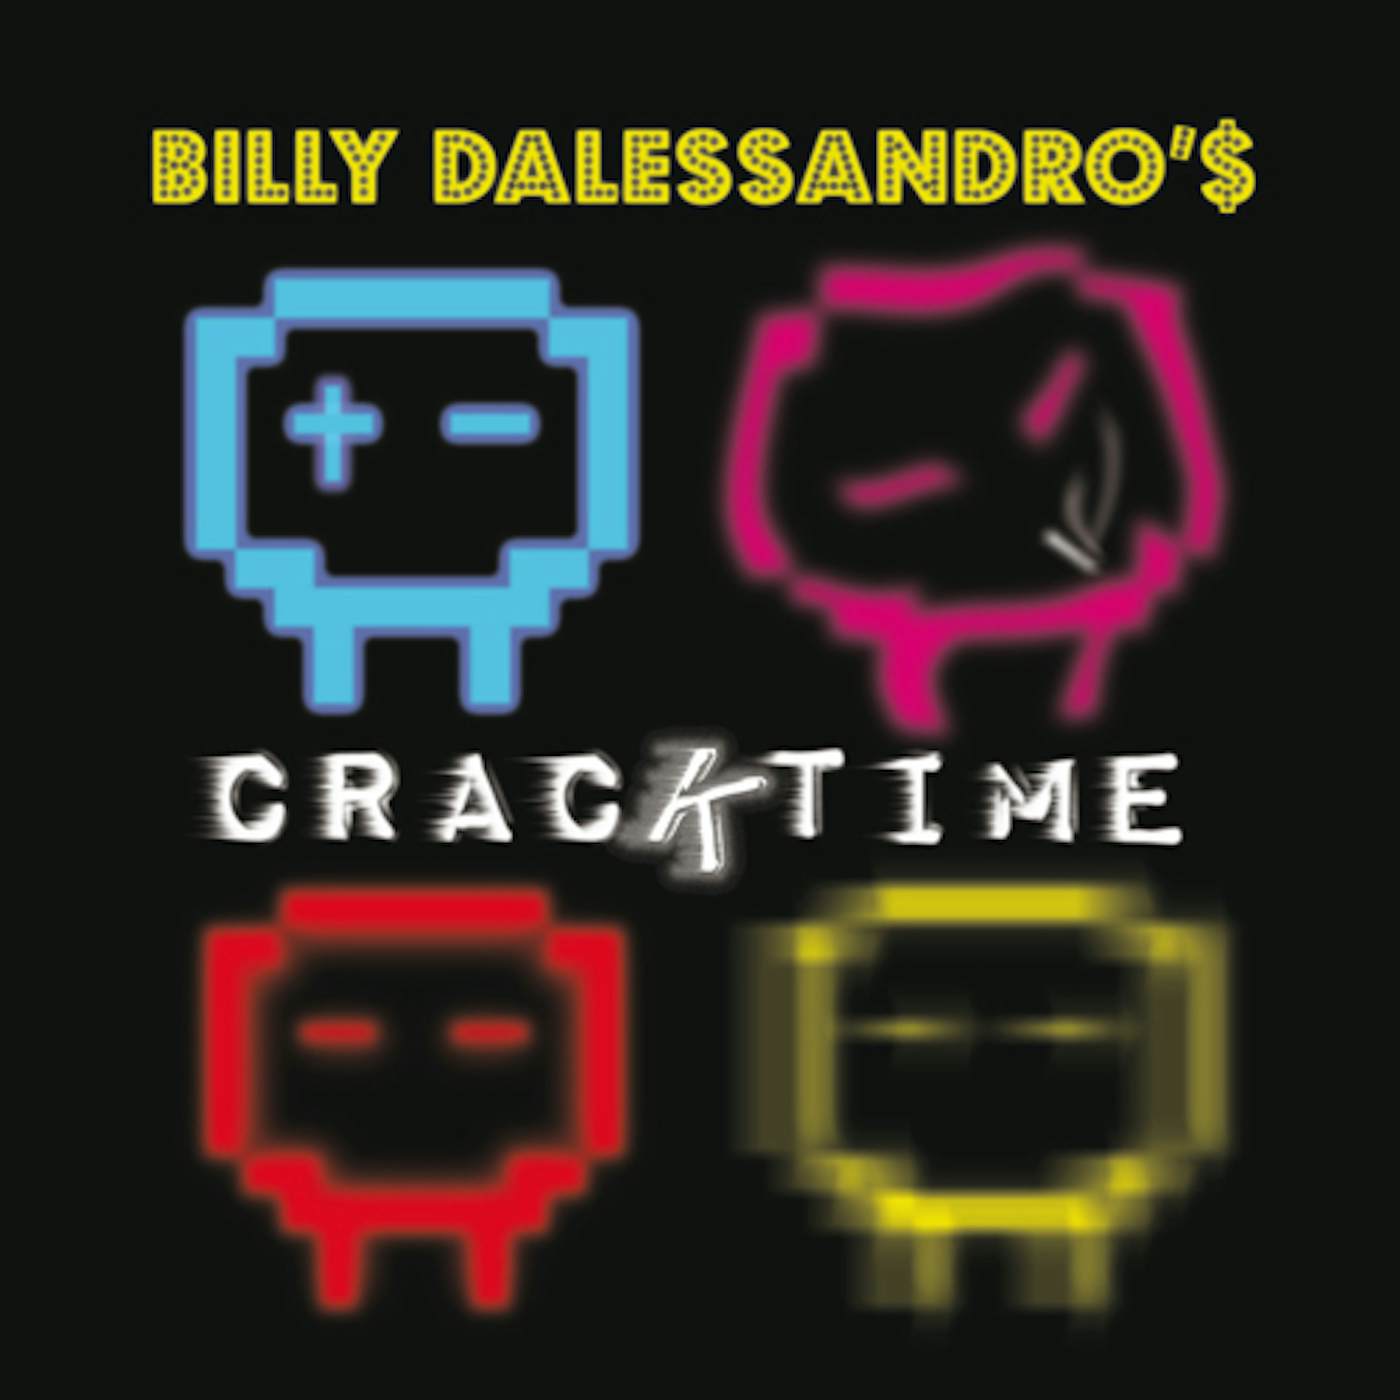 Billy Dalessandro CRACKTIME CD